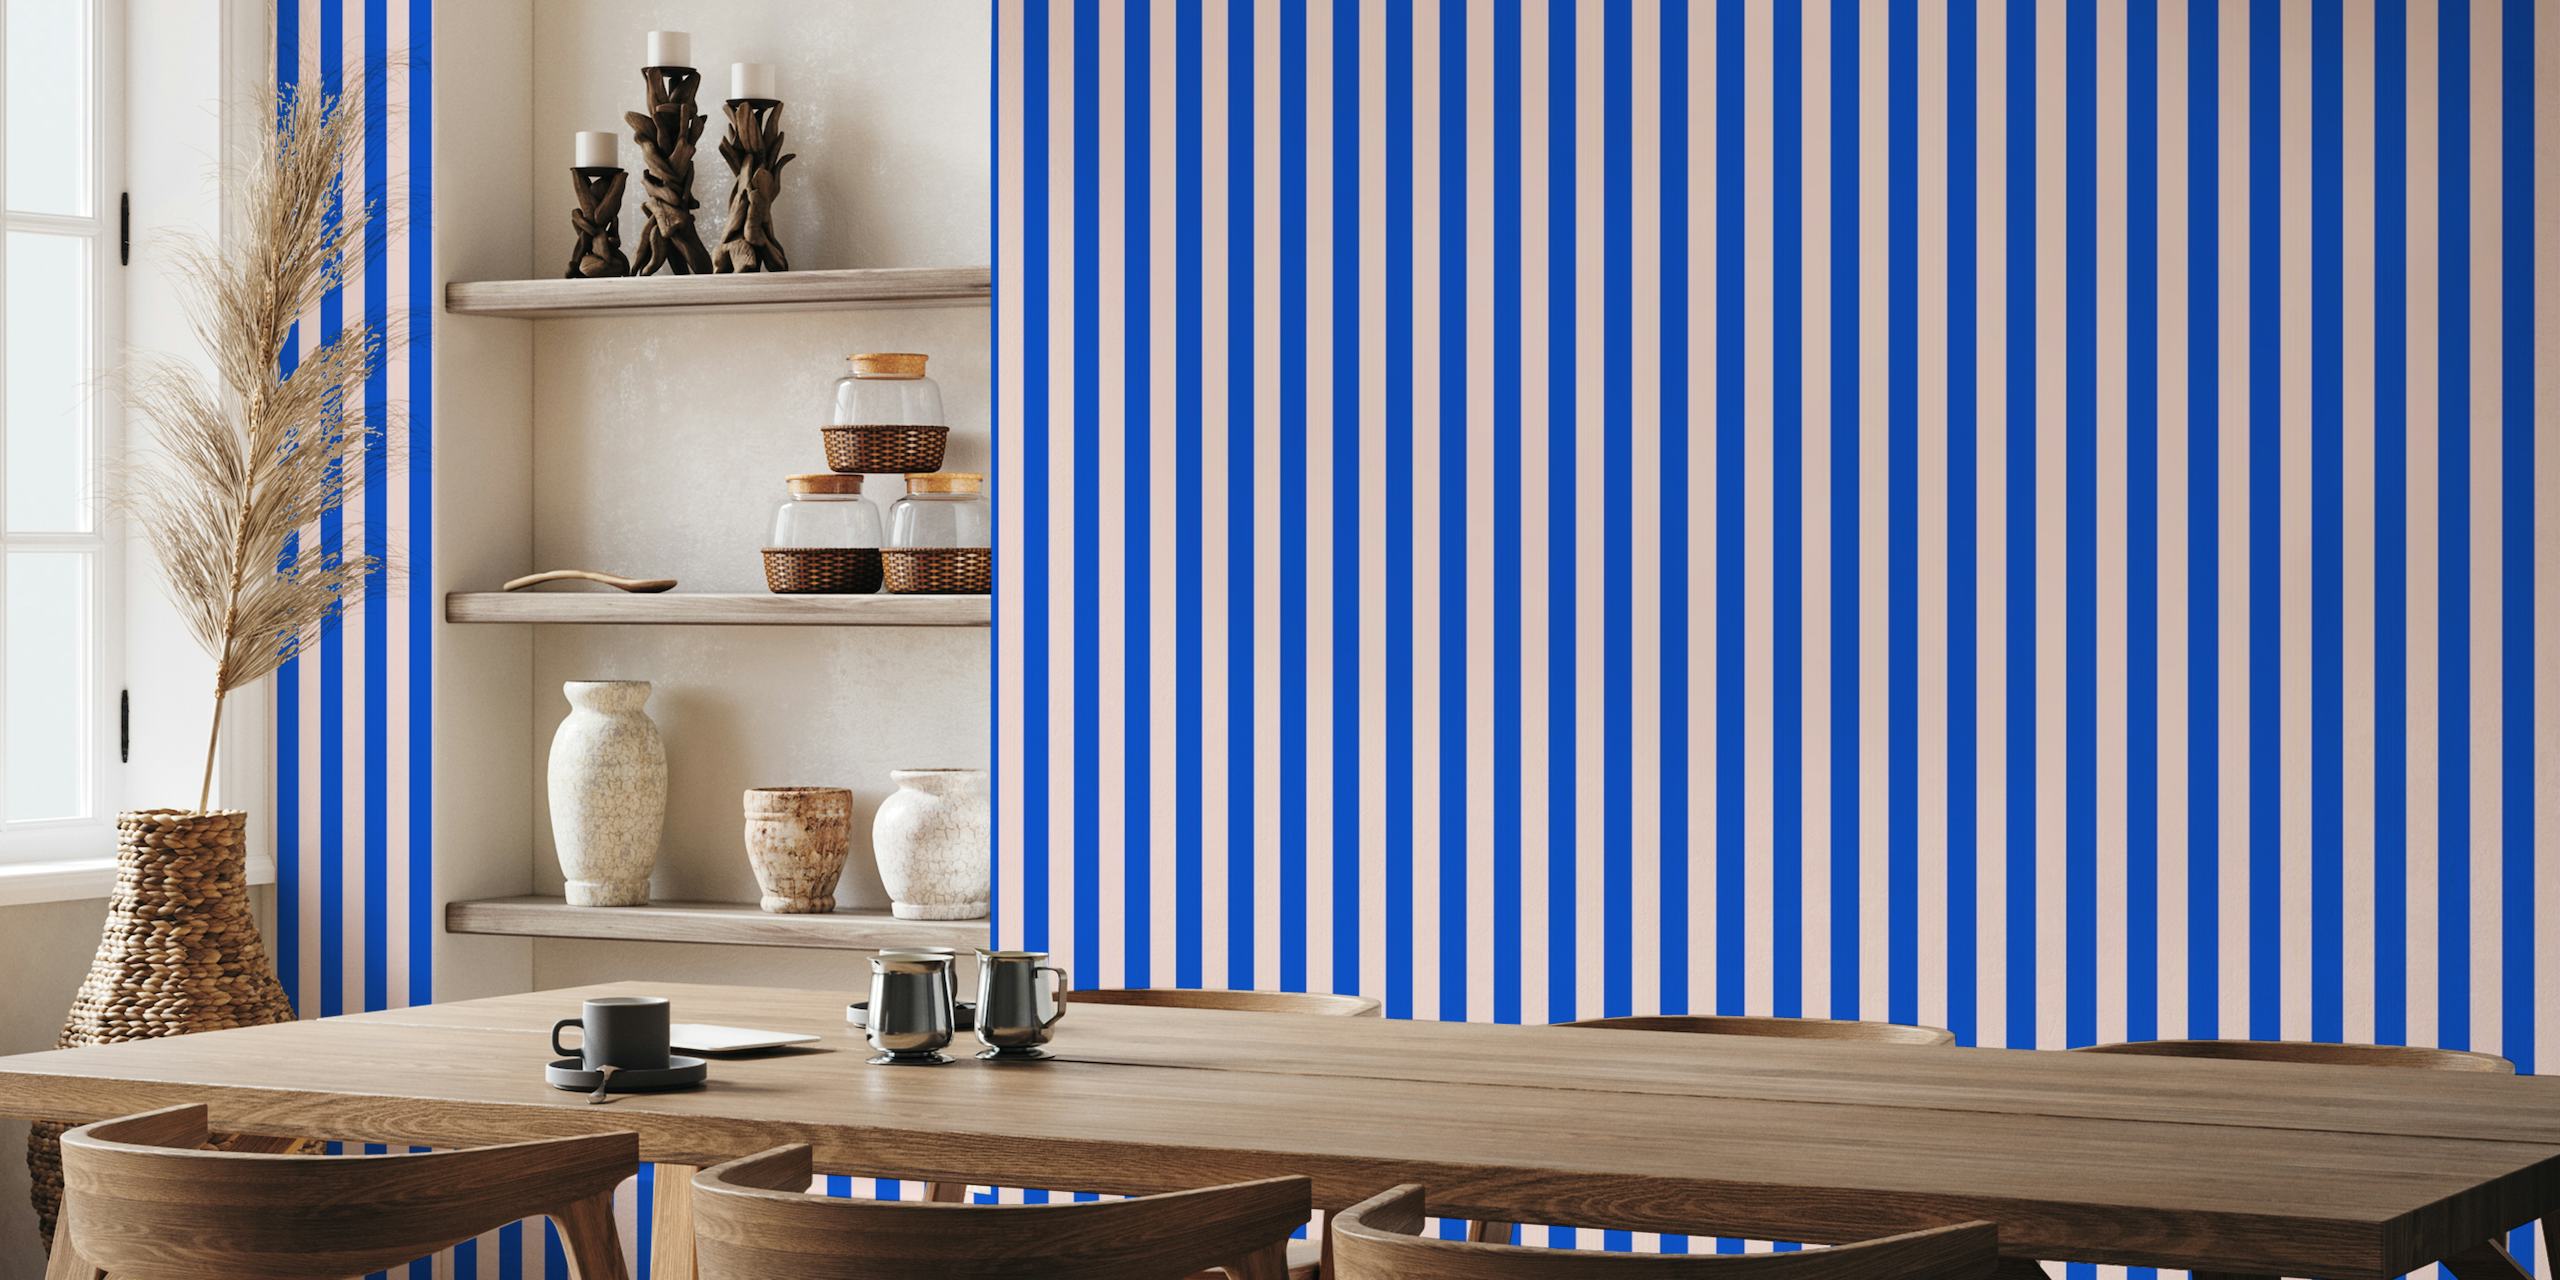 Pink and blue stripes ταπετσαρία